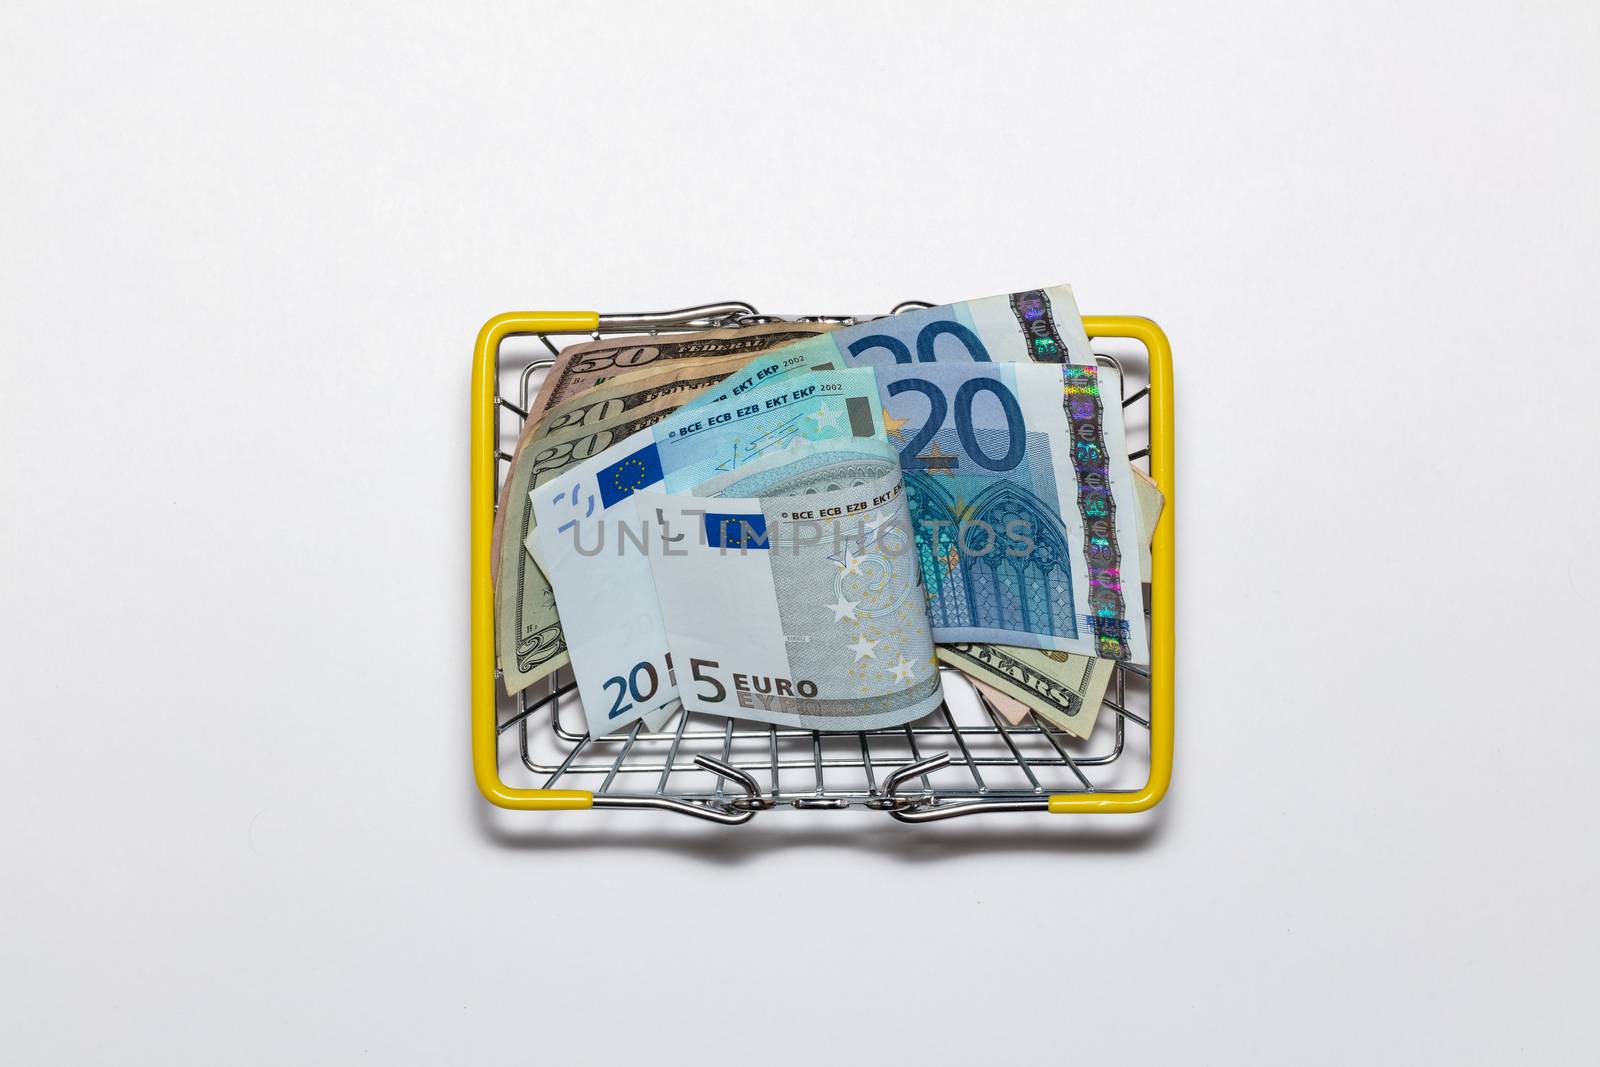 Dollar and euro bills mixed up in a basket for buyers on a white background. Isolated. Top view.